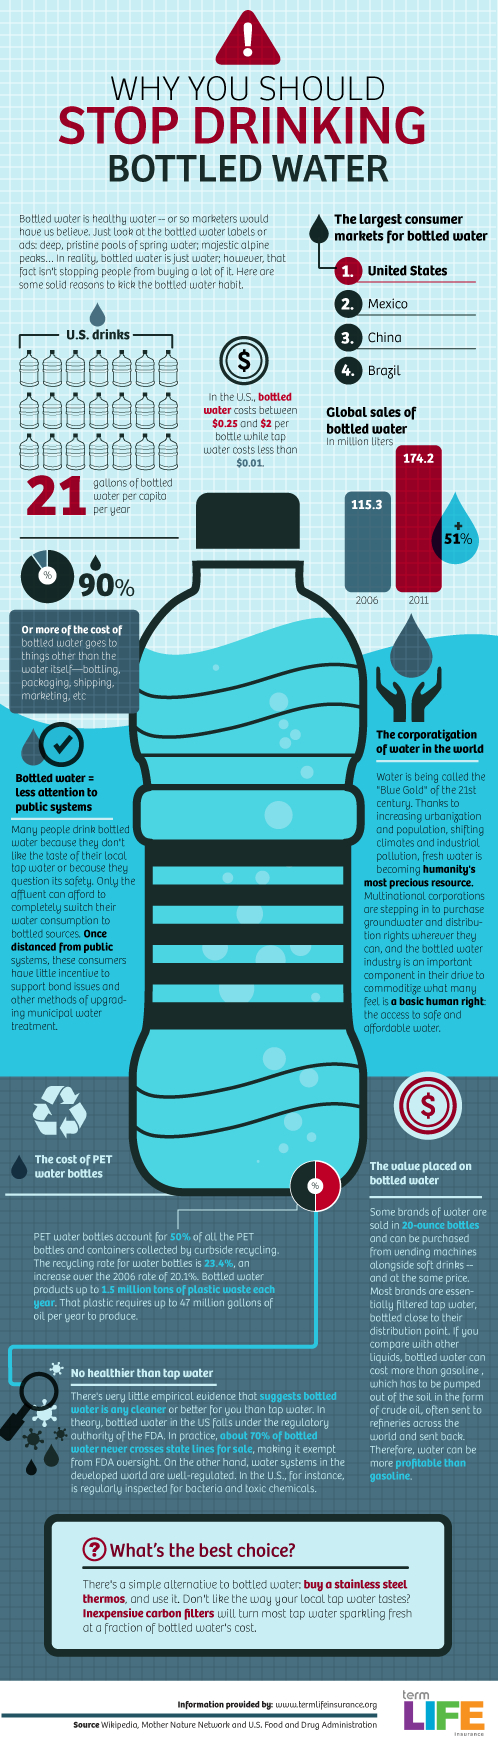 2010_07_27_bottledwater_500_Stop_drinking_bottled_water_the_facts-s498x1750-80992-1020.png